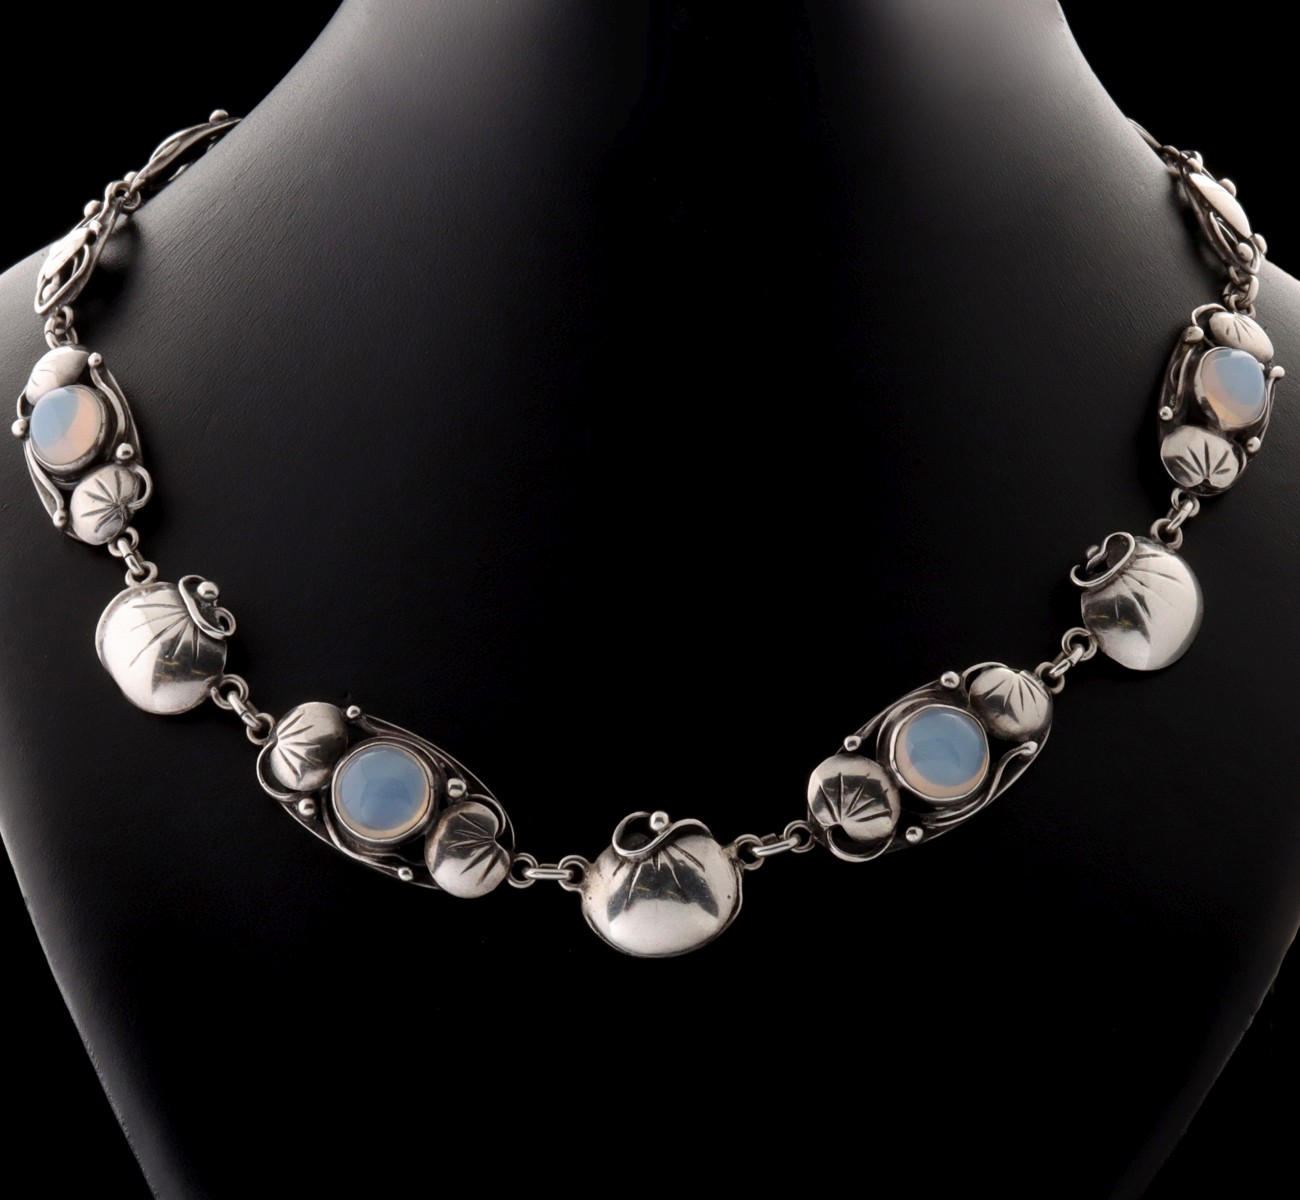 JO MICHELS STERLING SILVER AND MOONSTONE